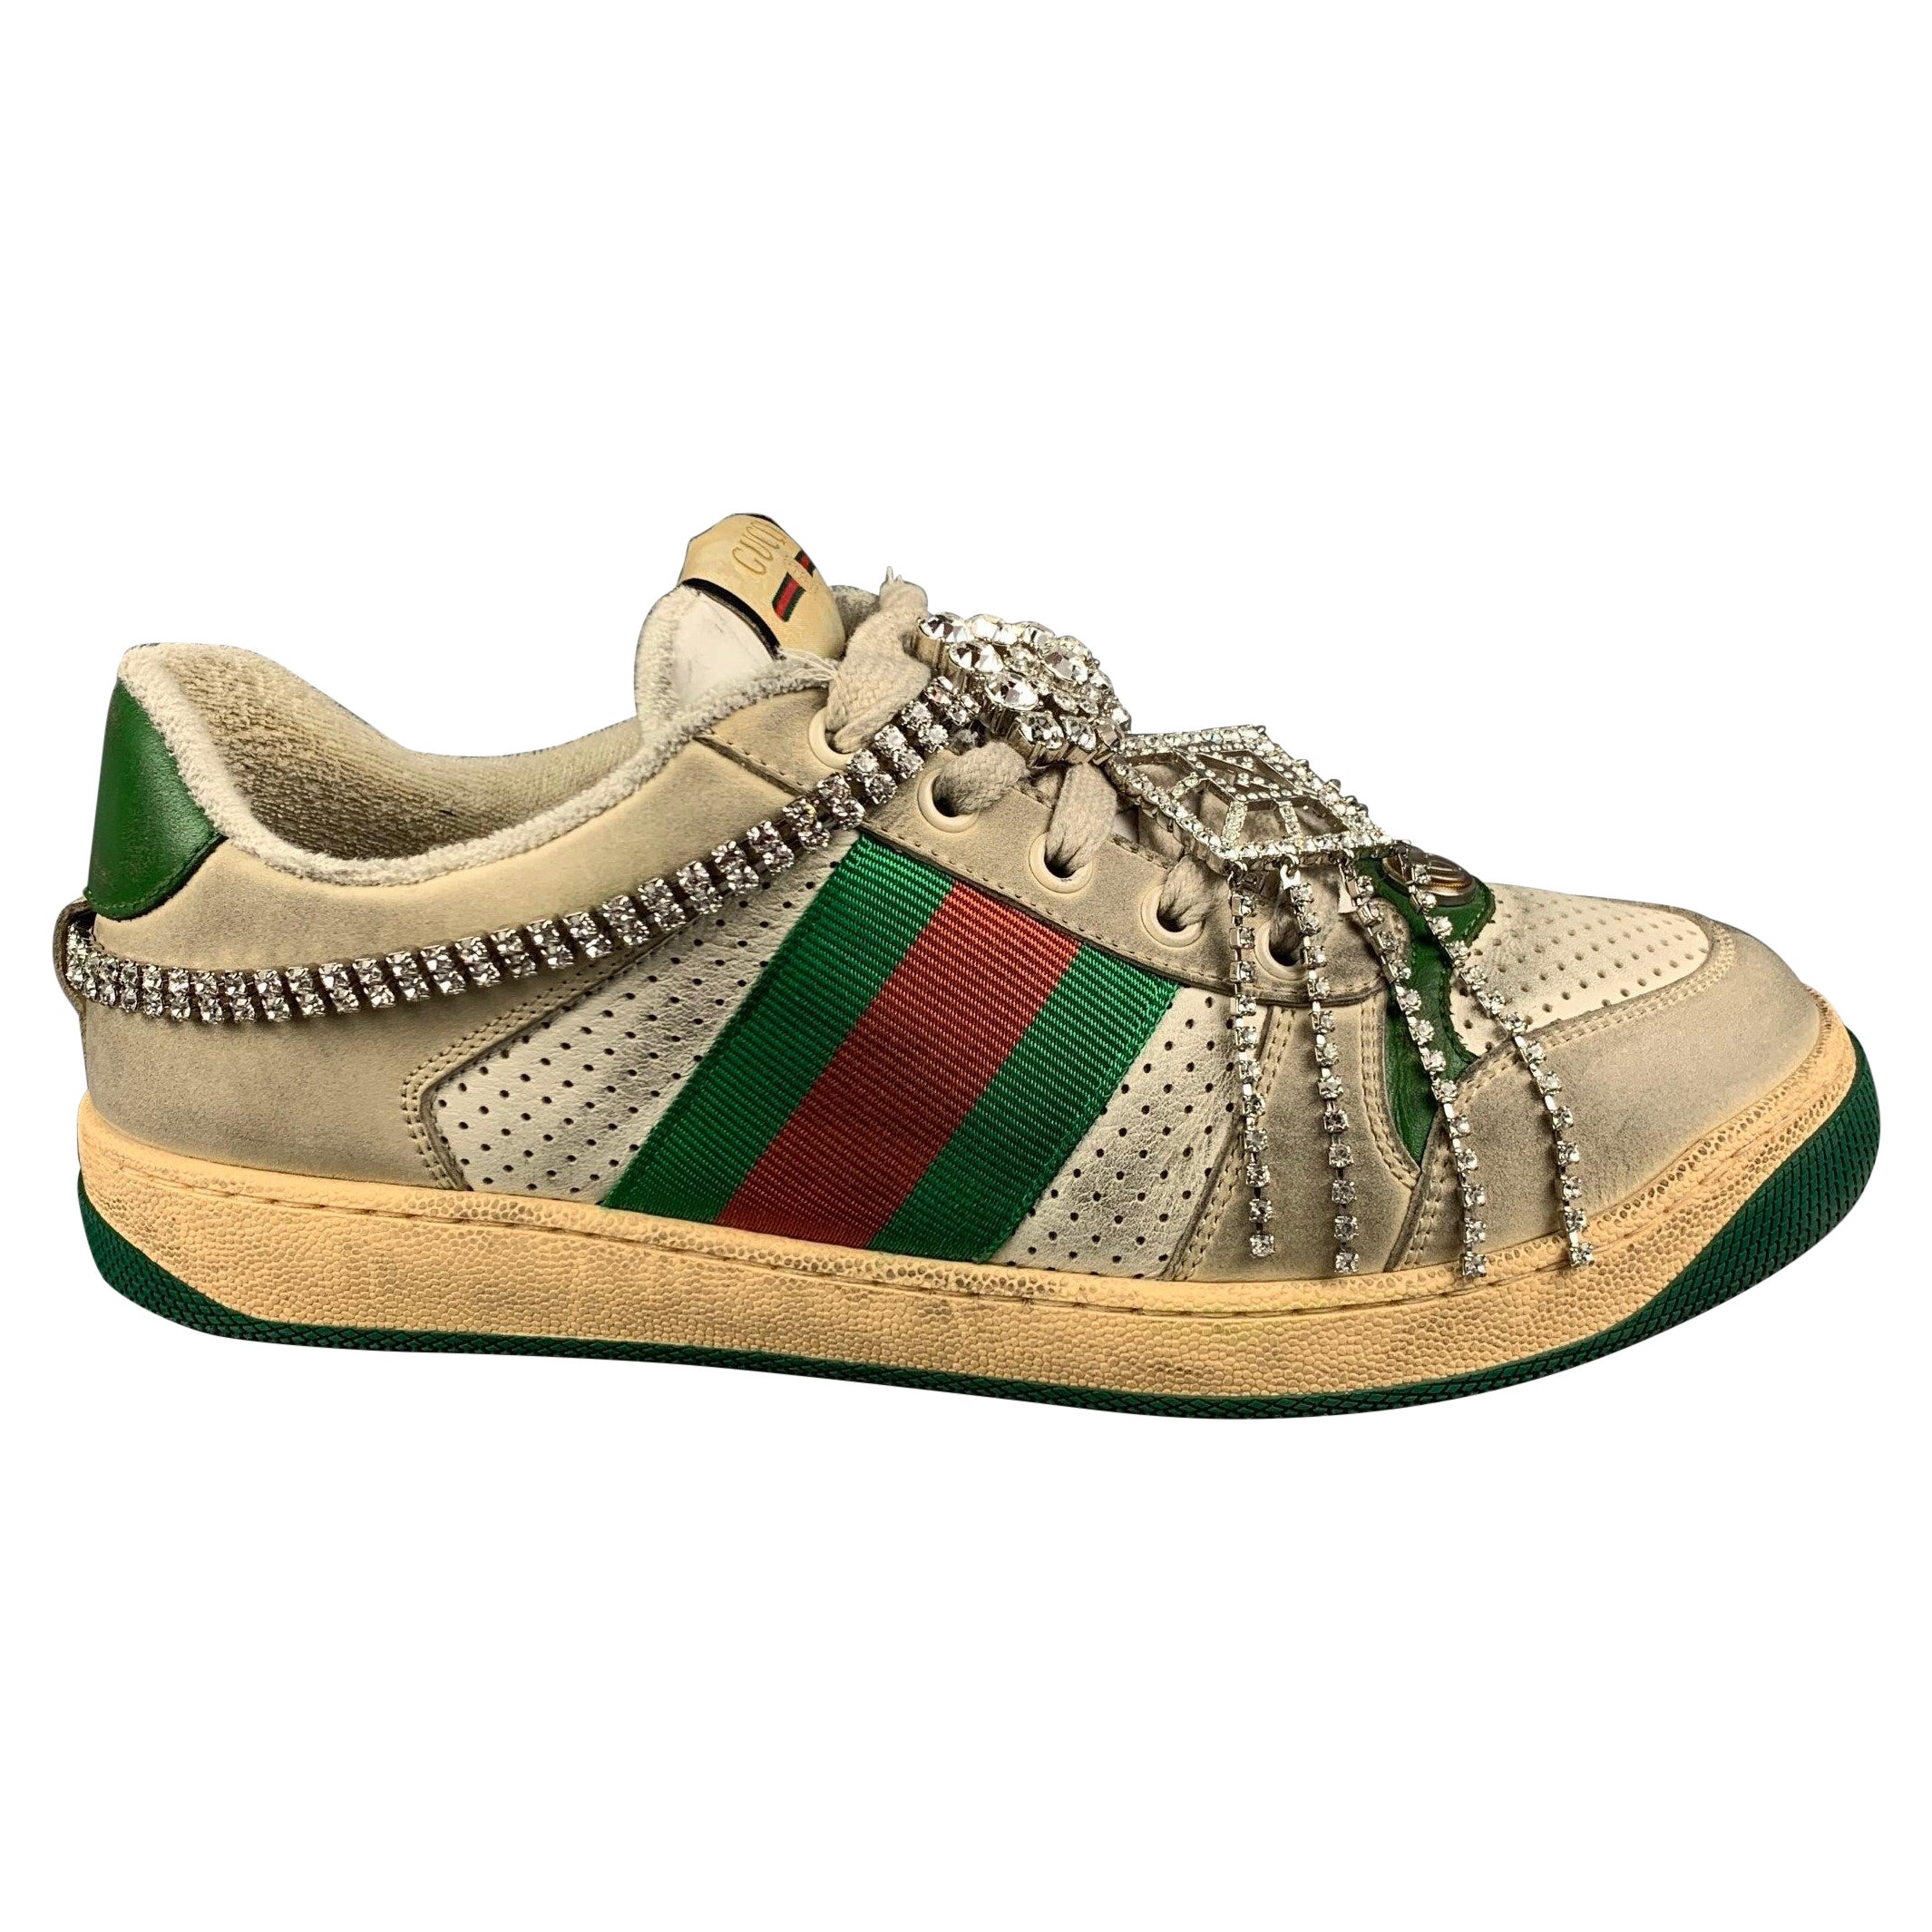 What is a size 8 in Gucci shoes?